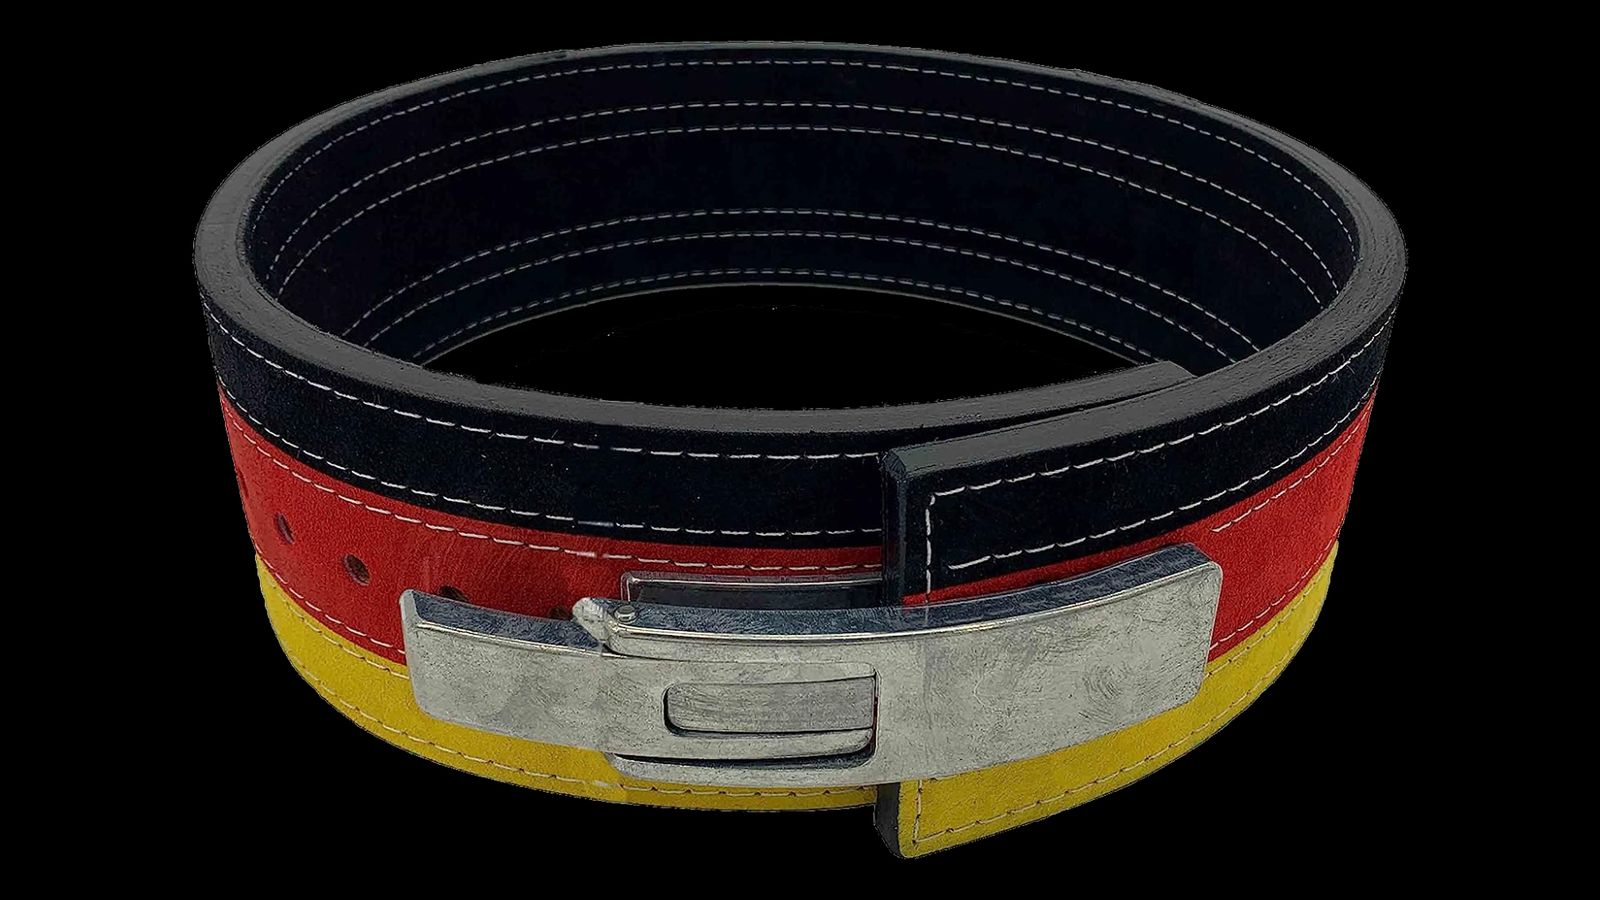 Inzer Forever Lever Belt product image of a black, red, and yellow-stripped belt with a metal lever closure system.